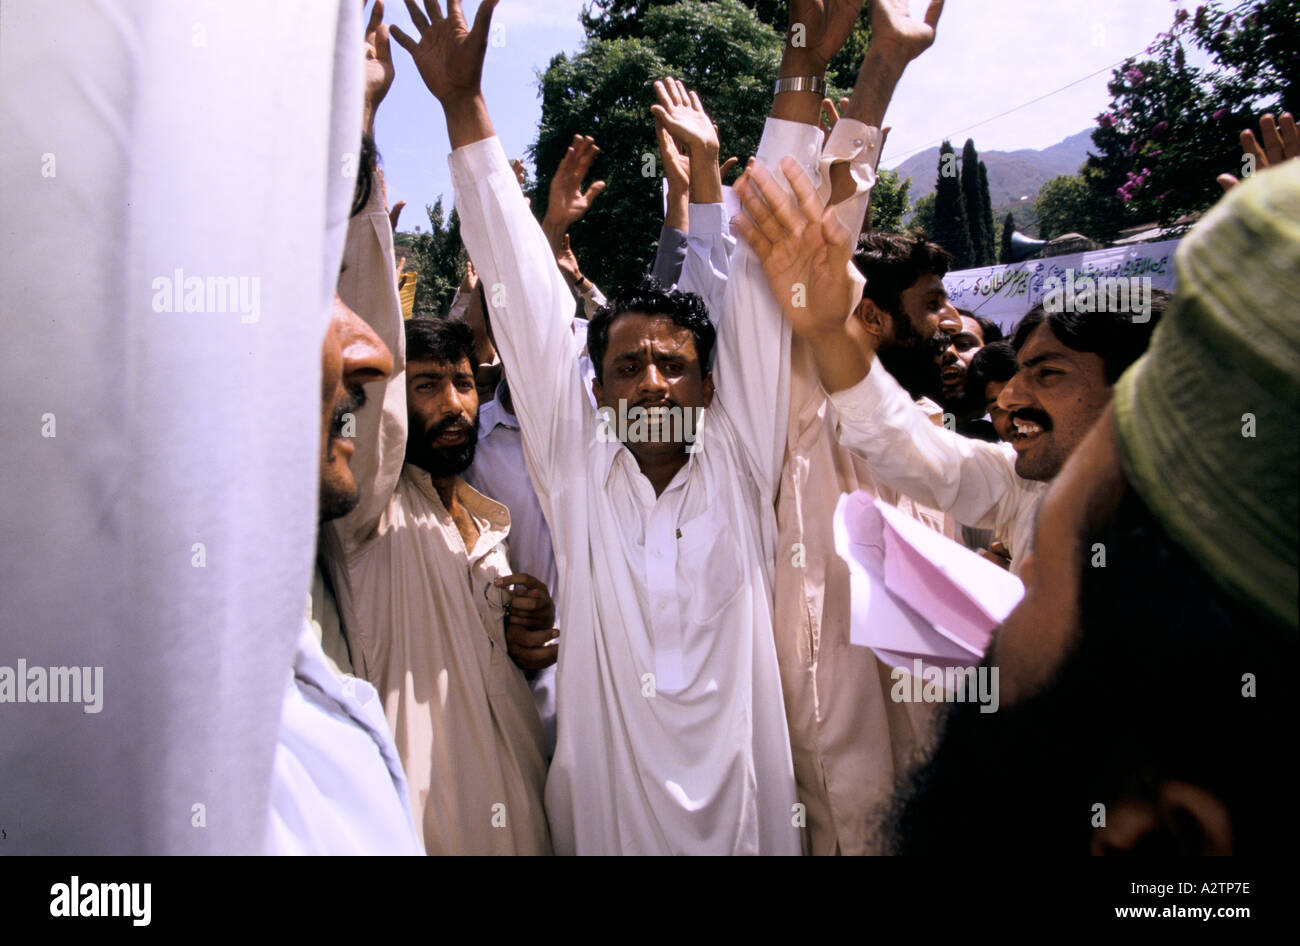 kashmir under conflict 1999 muzaffarabad about 2000 people protest against india 21 6 99 1999 Stock Photo